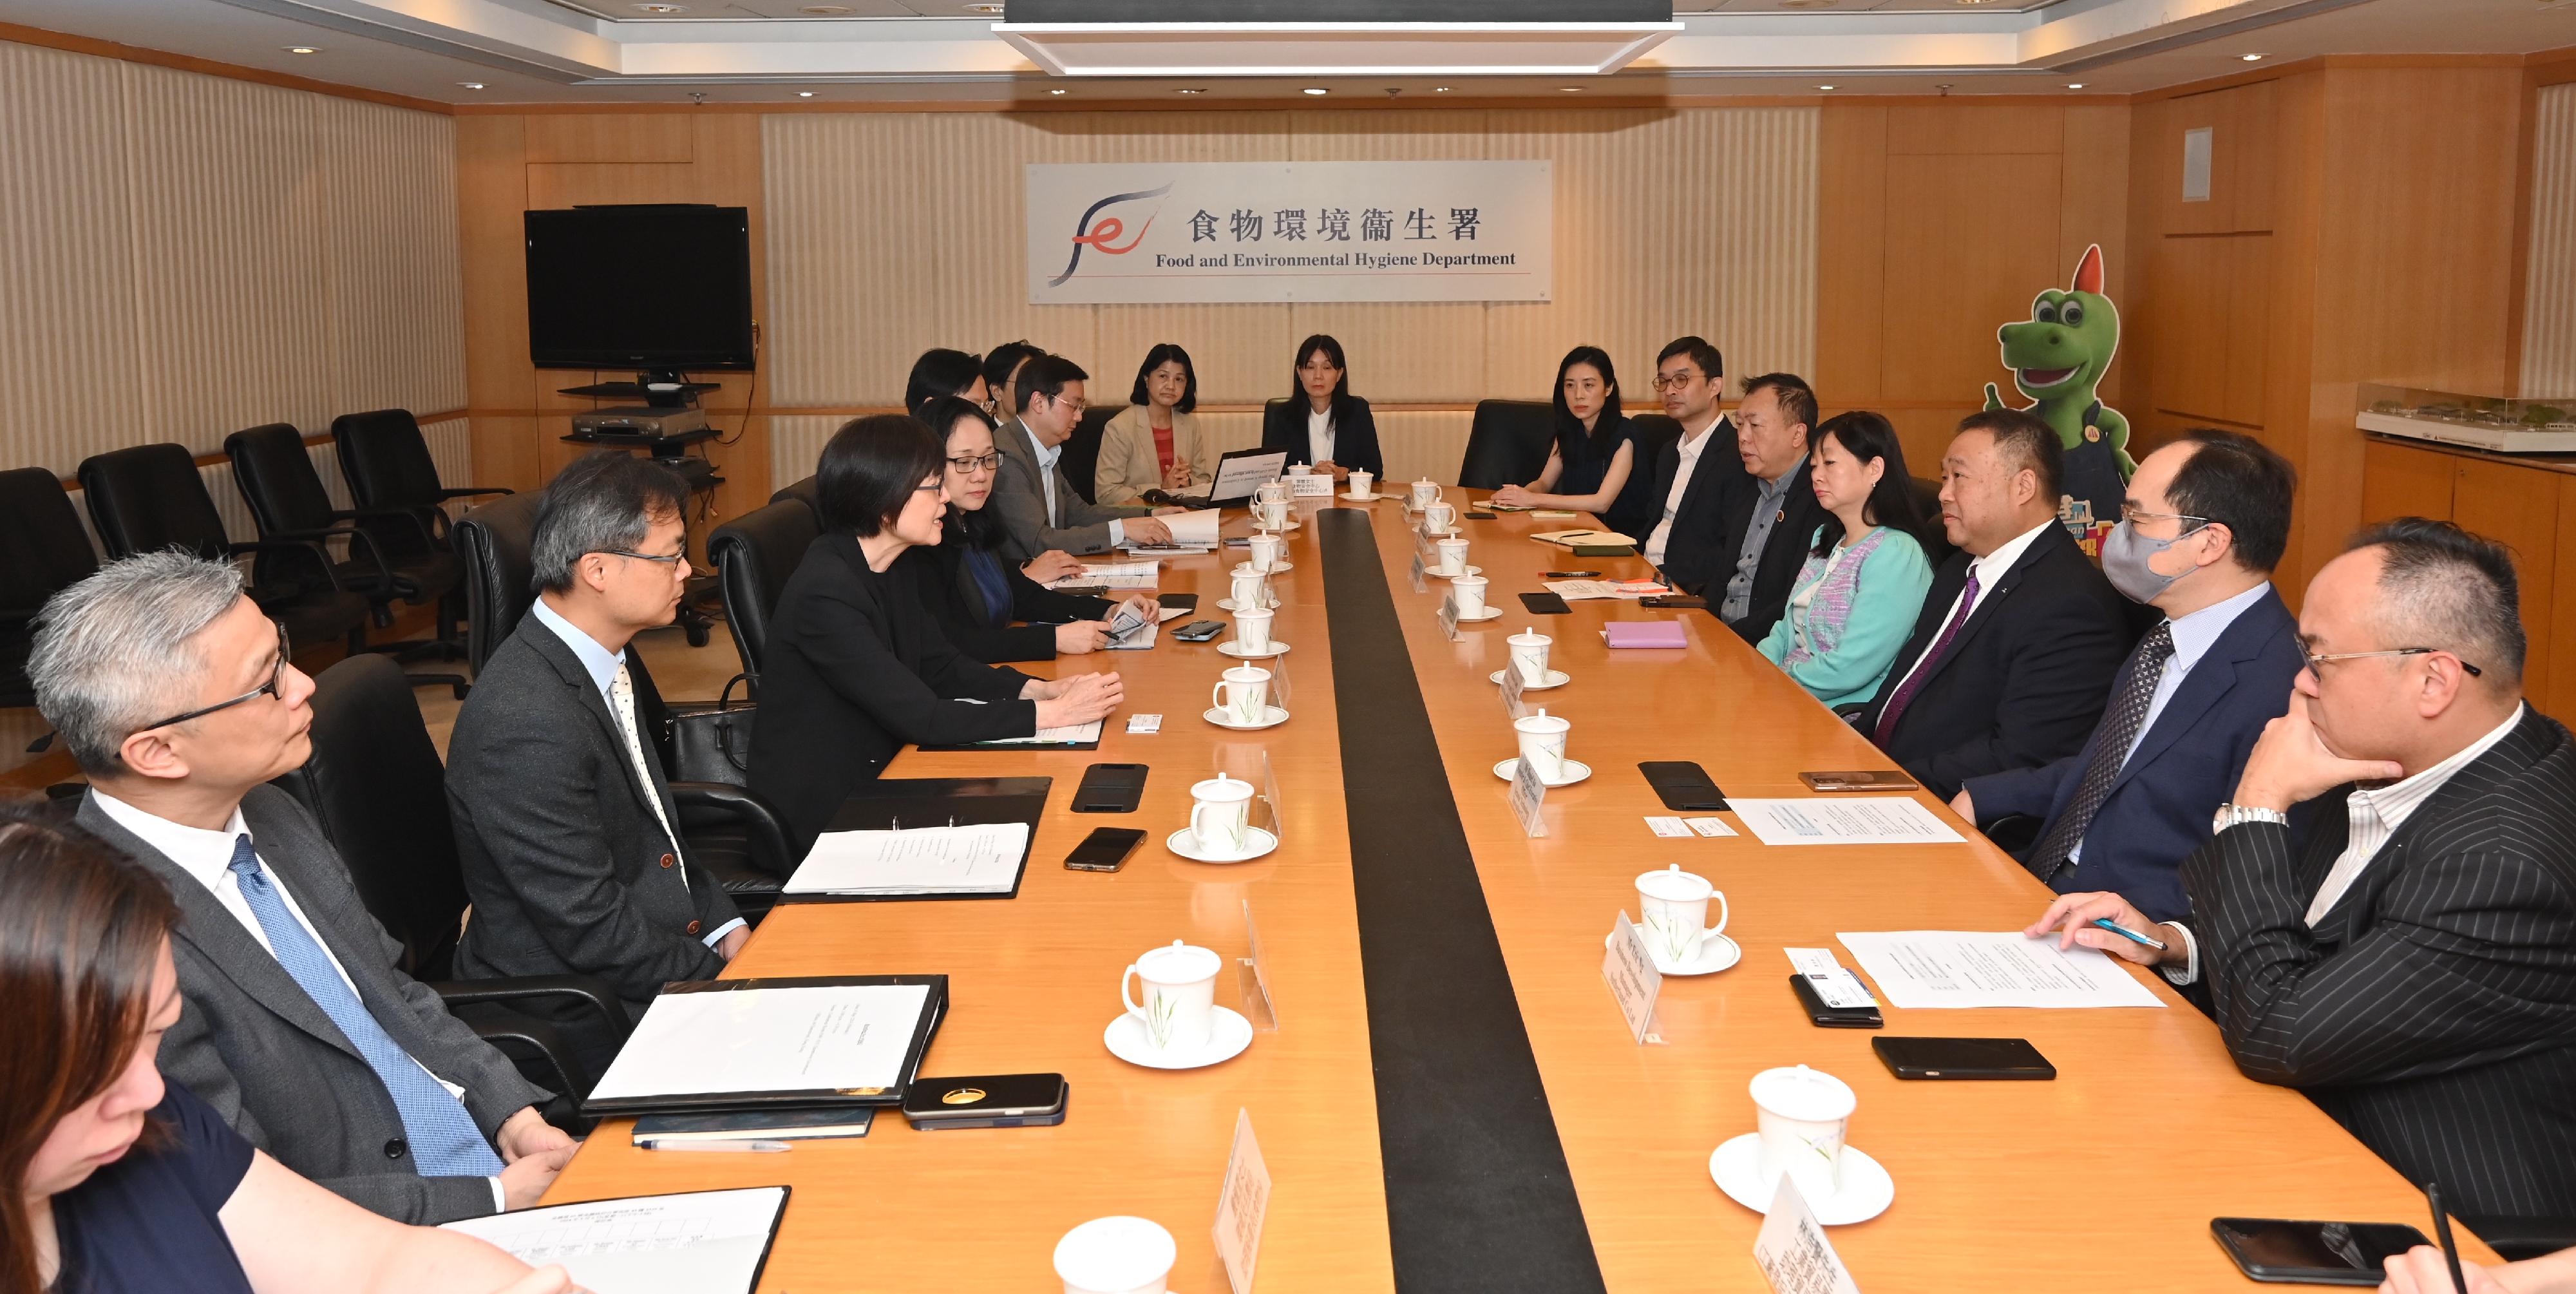 A spokesman for the Centre for Food Safety (CFS) of the Food and Environmental Hygiene Department stated today (May 7) that the new measure of the Cooperation Agreement on the Supervision of Safety and Facilitation of Customs Clearance of Food Products Manufactured in Hong Kong Exported to the Mainland will commence on May 21. Upon meeting specific requirements, Hong Kong-manufactured food products with satisfactory on-site inspection of the Mainland Customs that are still required to go through sampling and testing can be released upon completion of sampling without waiting for the results. The CFS has arranged briefings on details of the new measure for the local food trade.